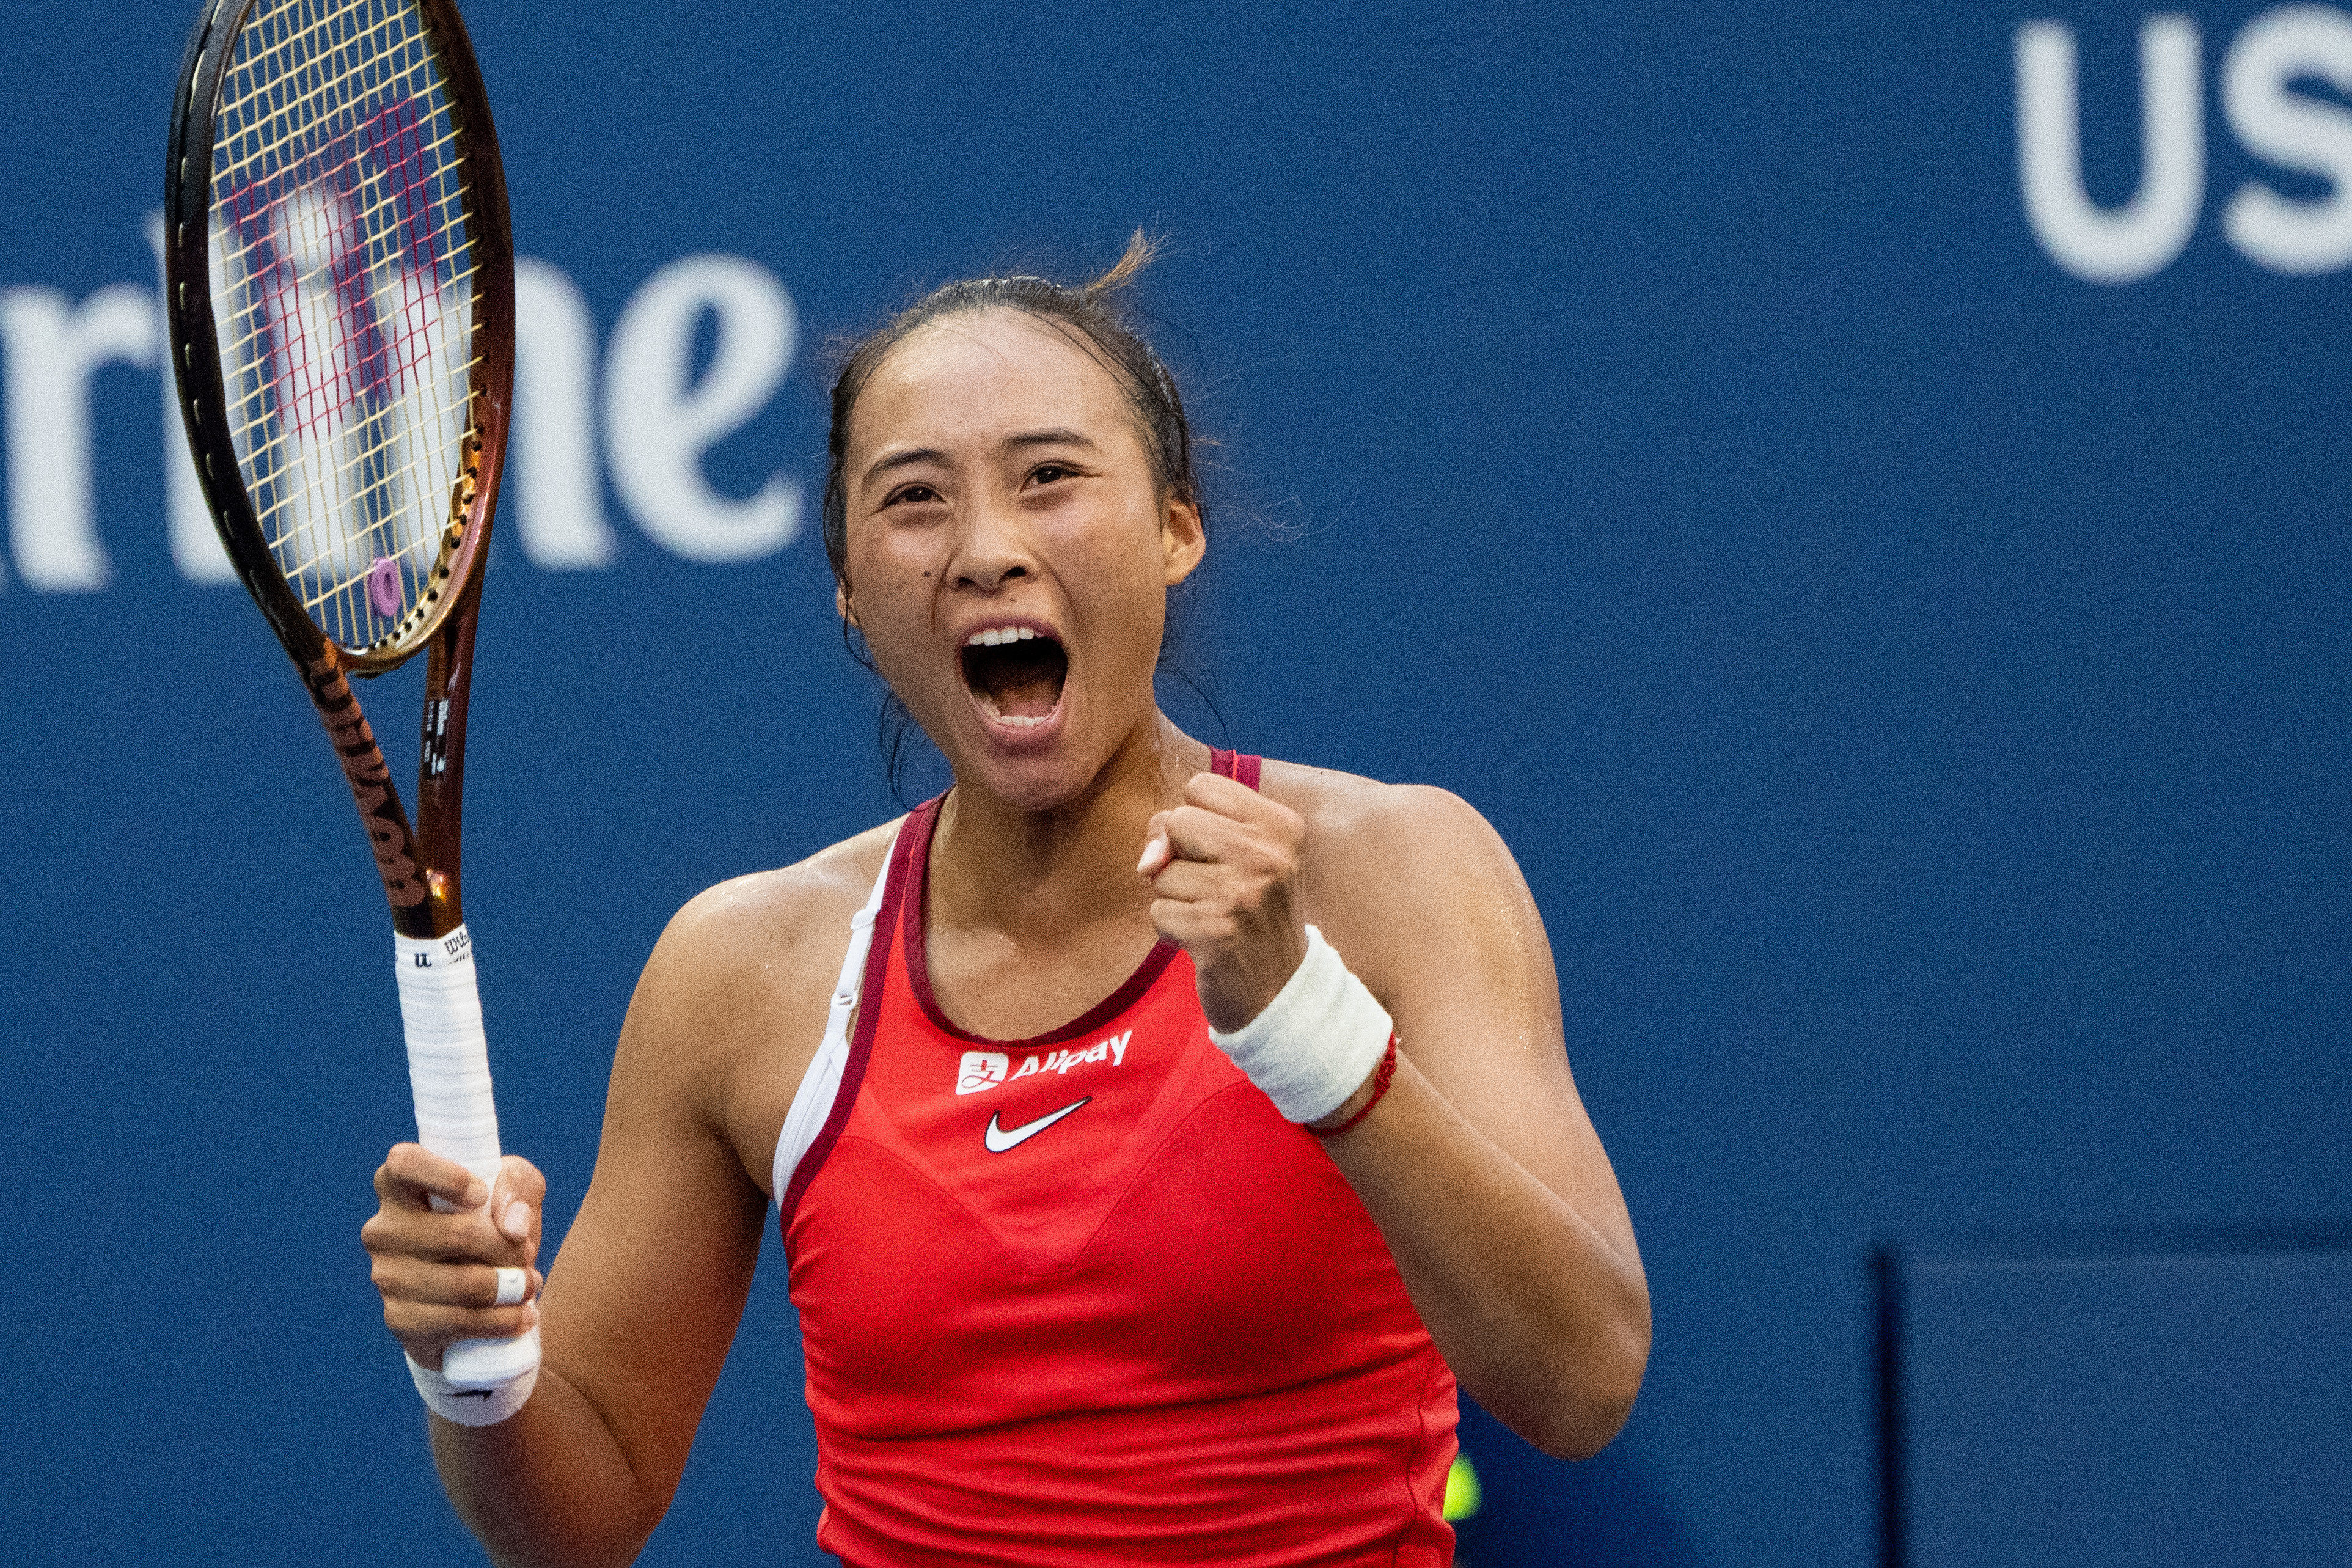 In this issue of the Global Impact newsletter, we look ahead to the return of professional tennis in China, including a stop in Hong Kong by the WTA tour in October. Photo: Xinhua